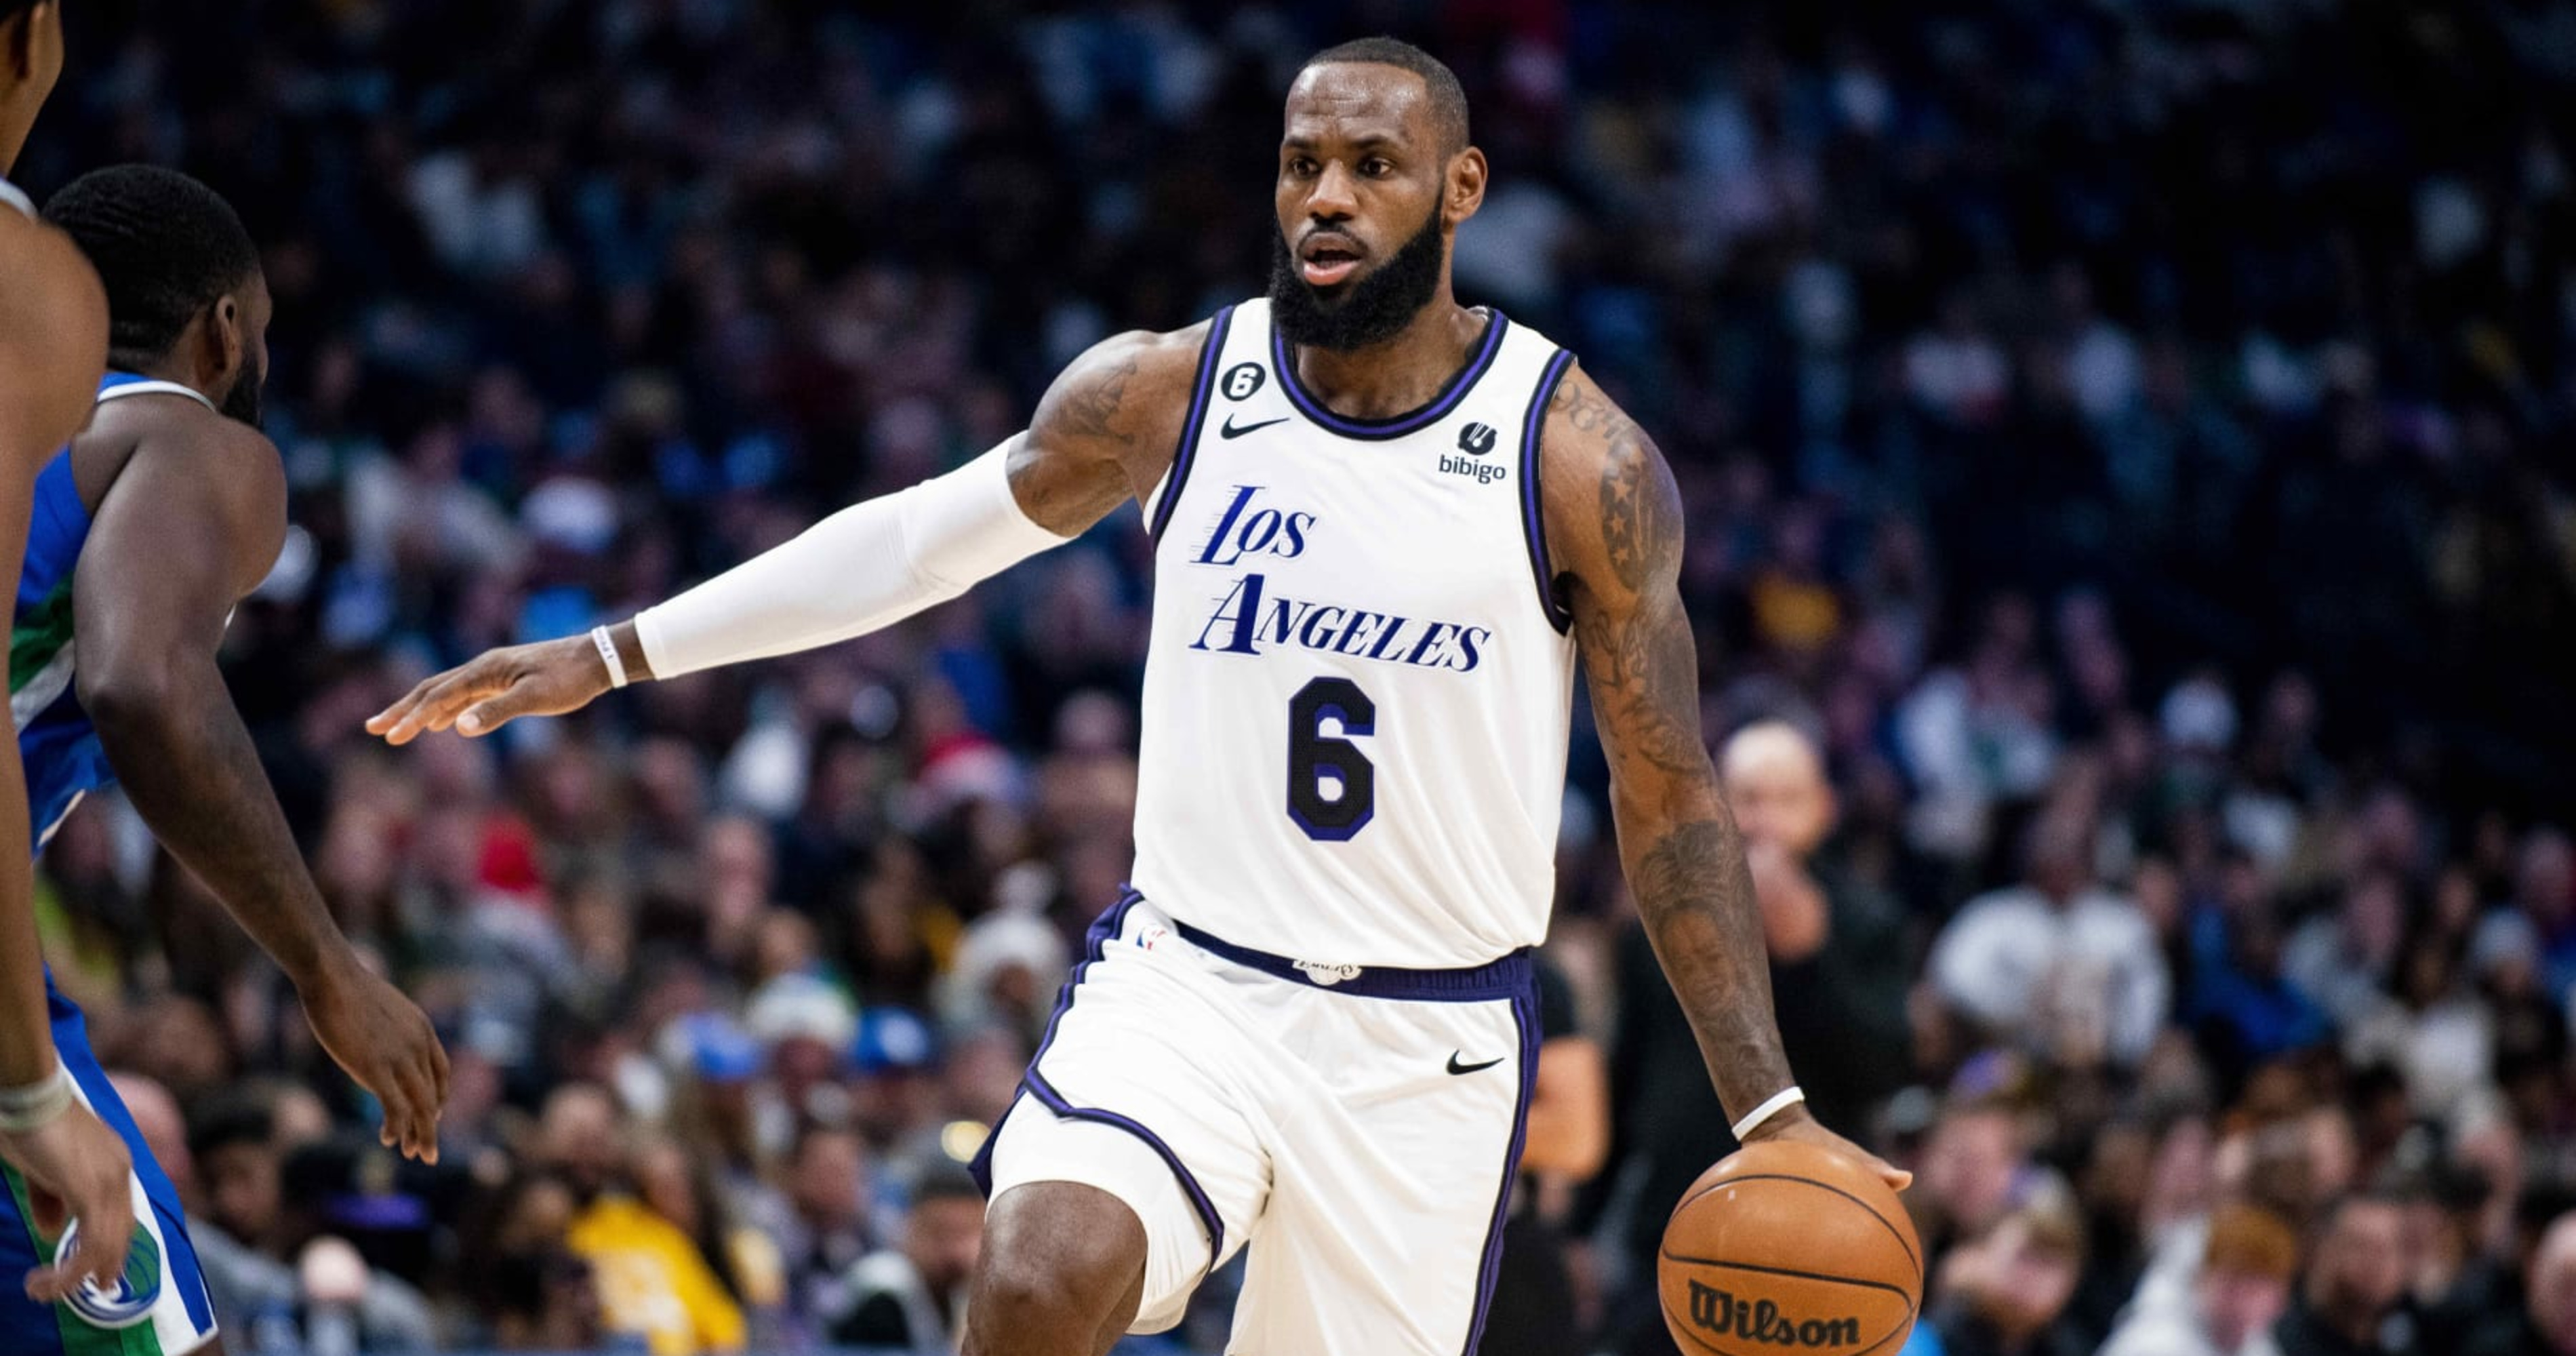 Lakers' LeBron James to Wear No. 23 Instead of 6 Next Season to